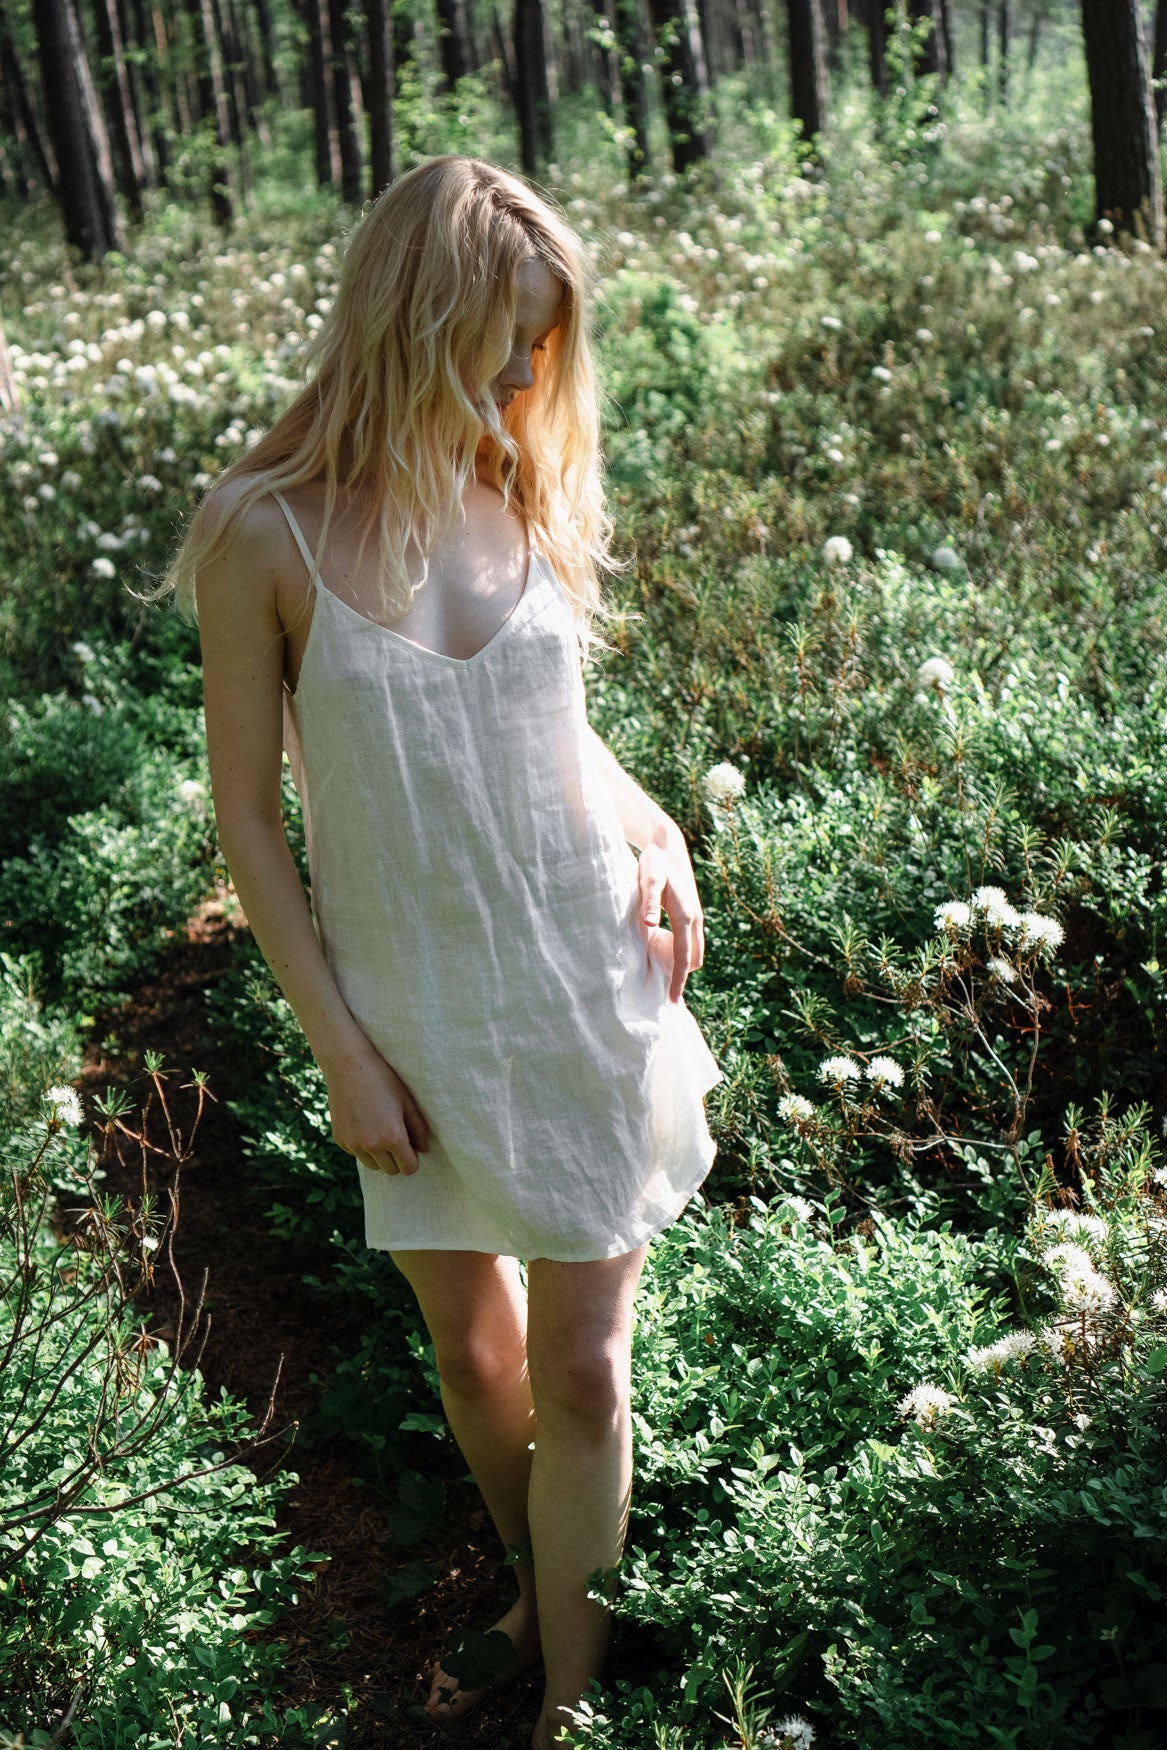 Organic, sustainable and sexy at the same time! Agasåga white short natural linen slip dress, nightdress with straps. This sleepwear is natural, soft, breathable and pure. It’s a conscious and healthy choice for your body and environment that embraces genuine selflove and selfcare. Handmade with love in the North.